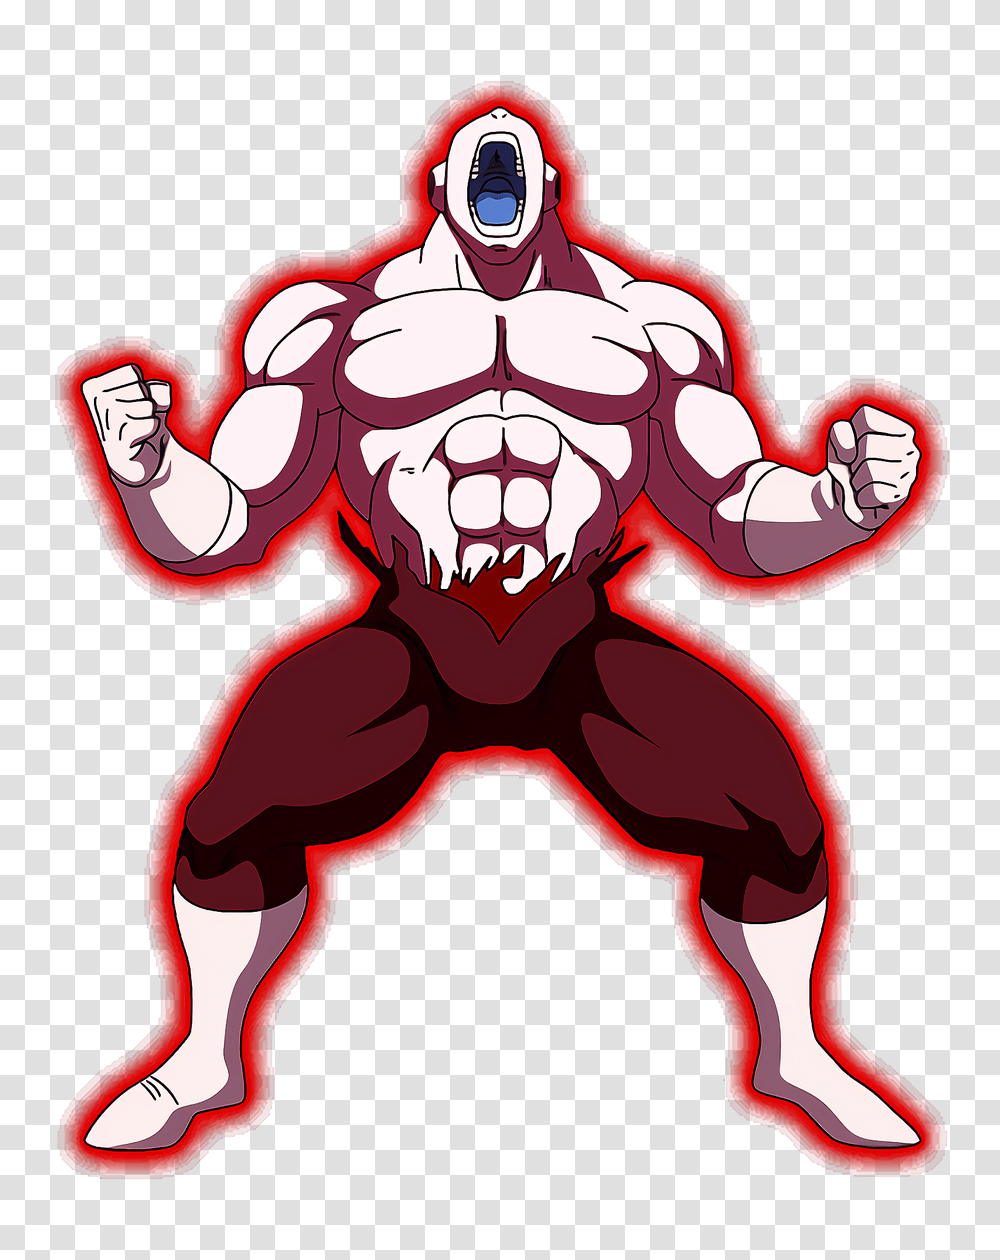 Hydros Dokkanart On Twitter, Hand, Ornament, Mouth, Statue Transparent Png